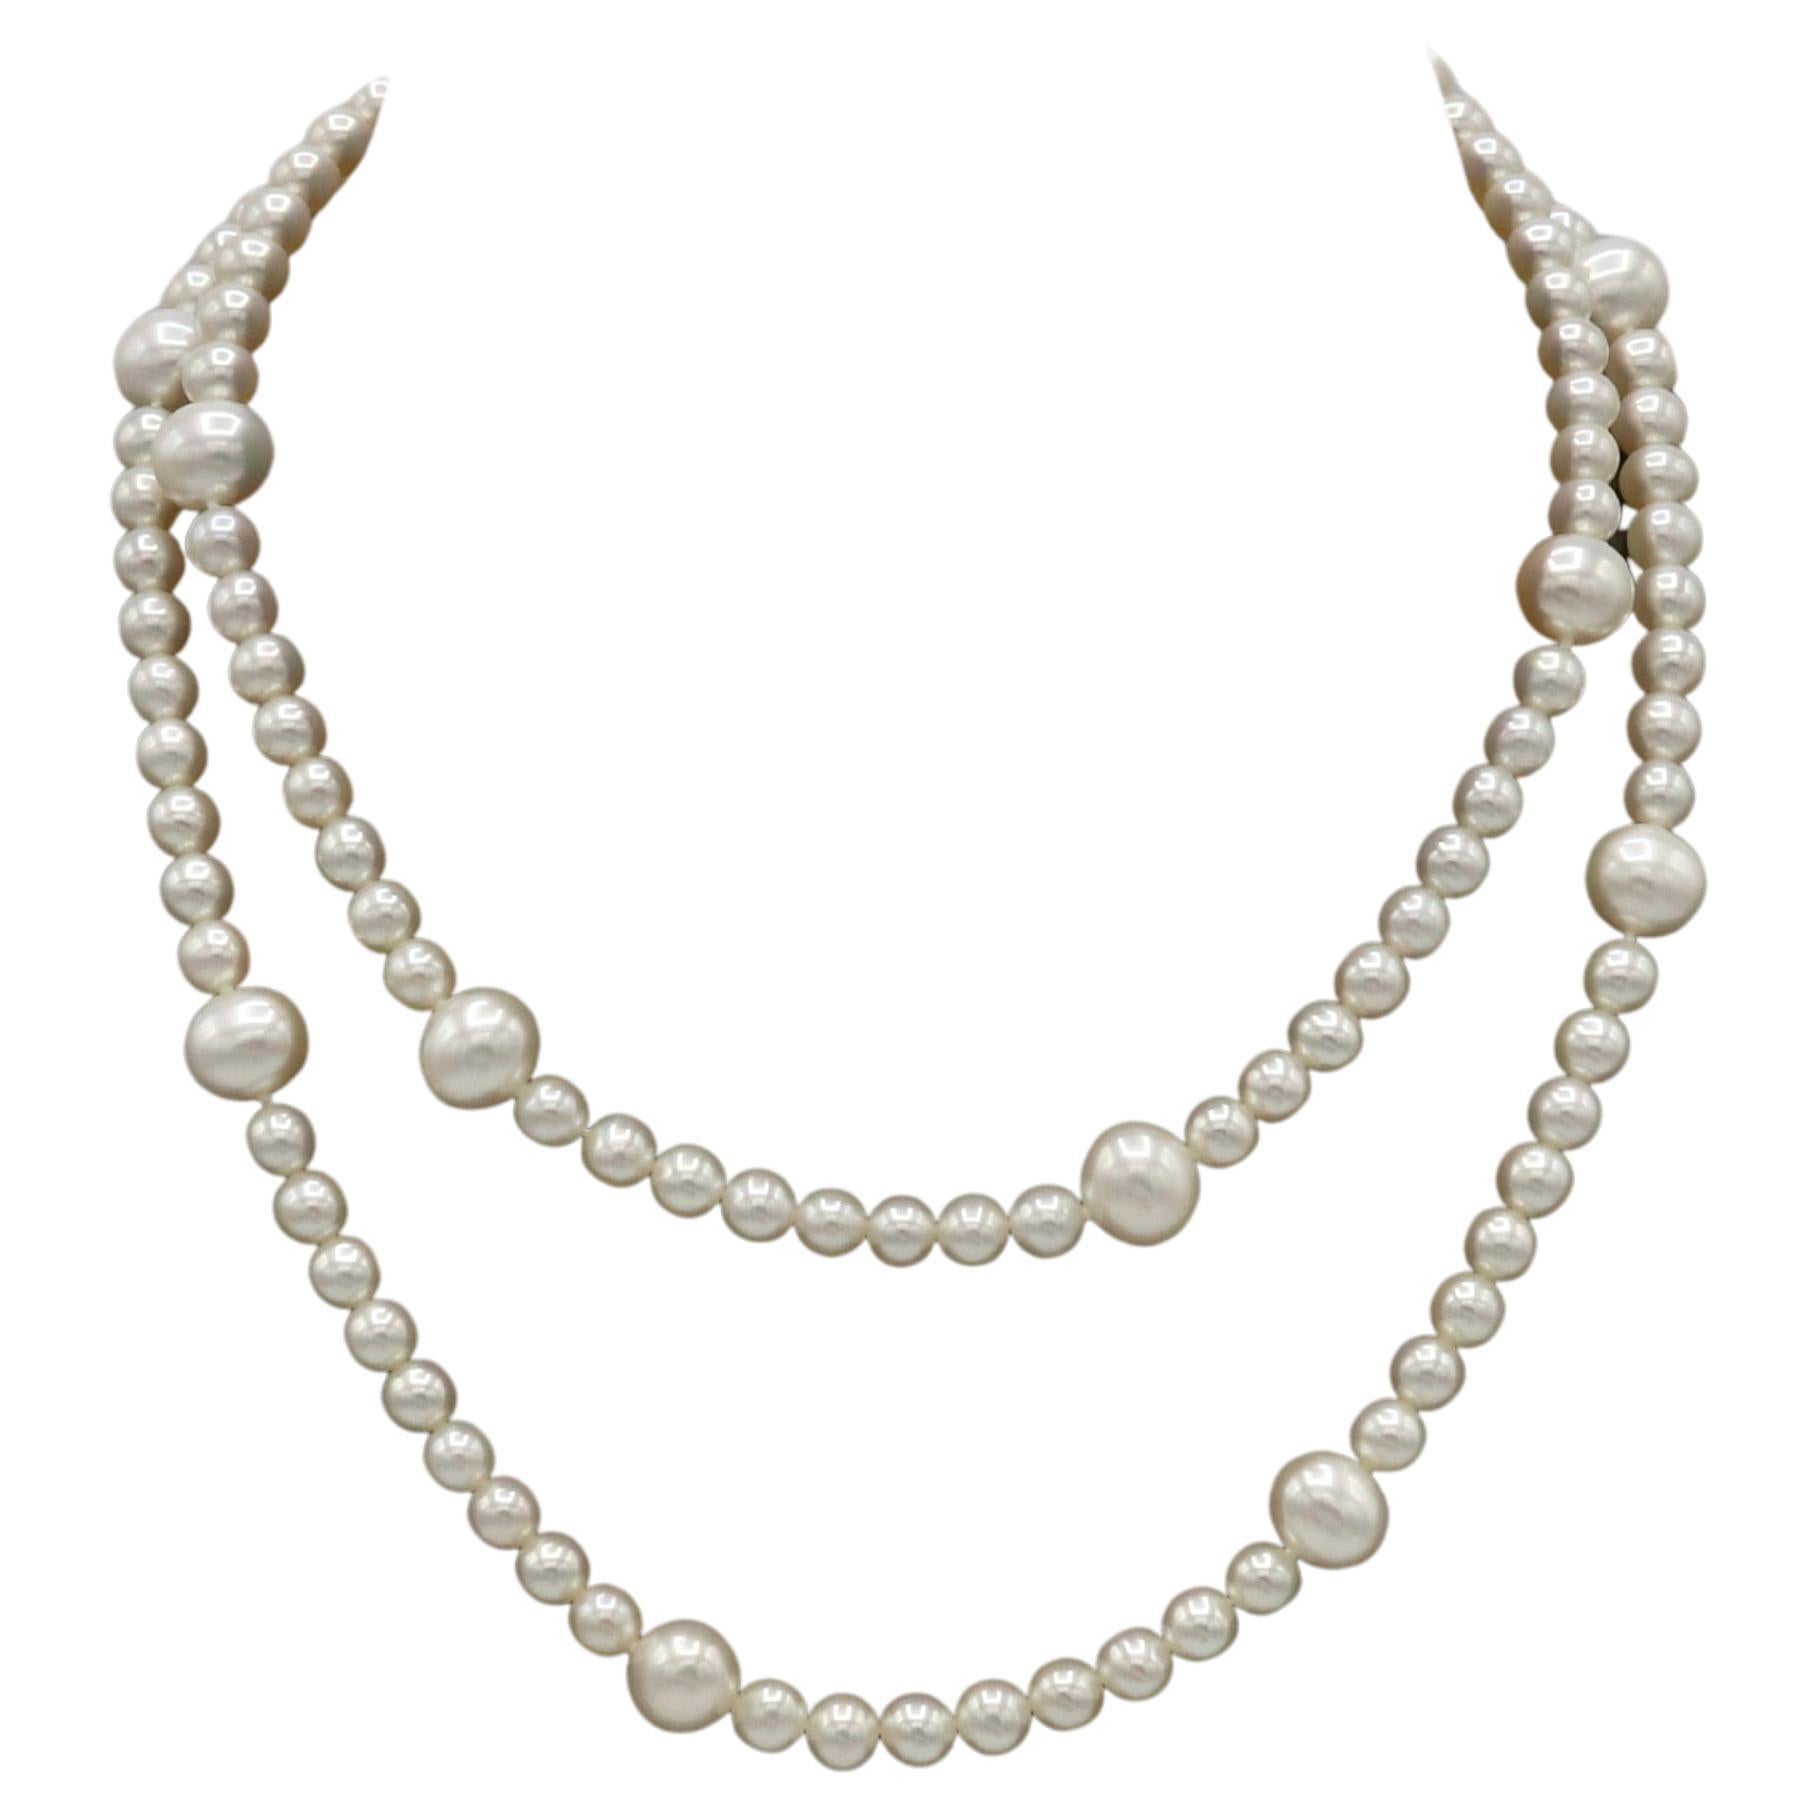 Tiffany & Co. Sterling Silver Pearl Necklace 